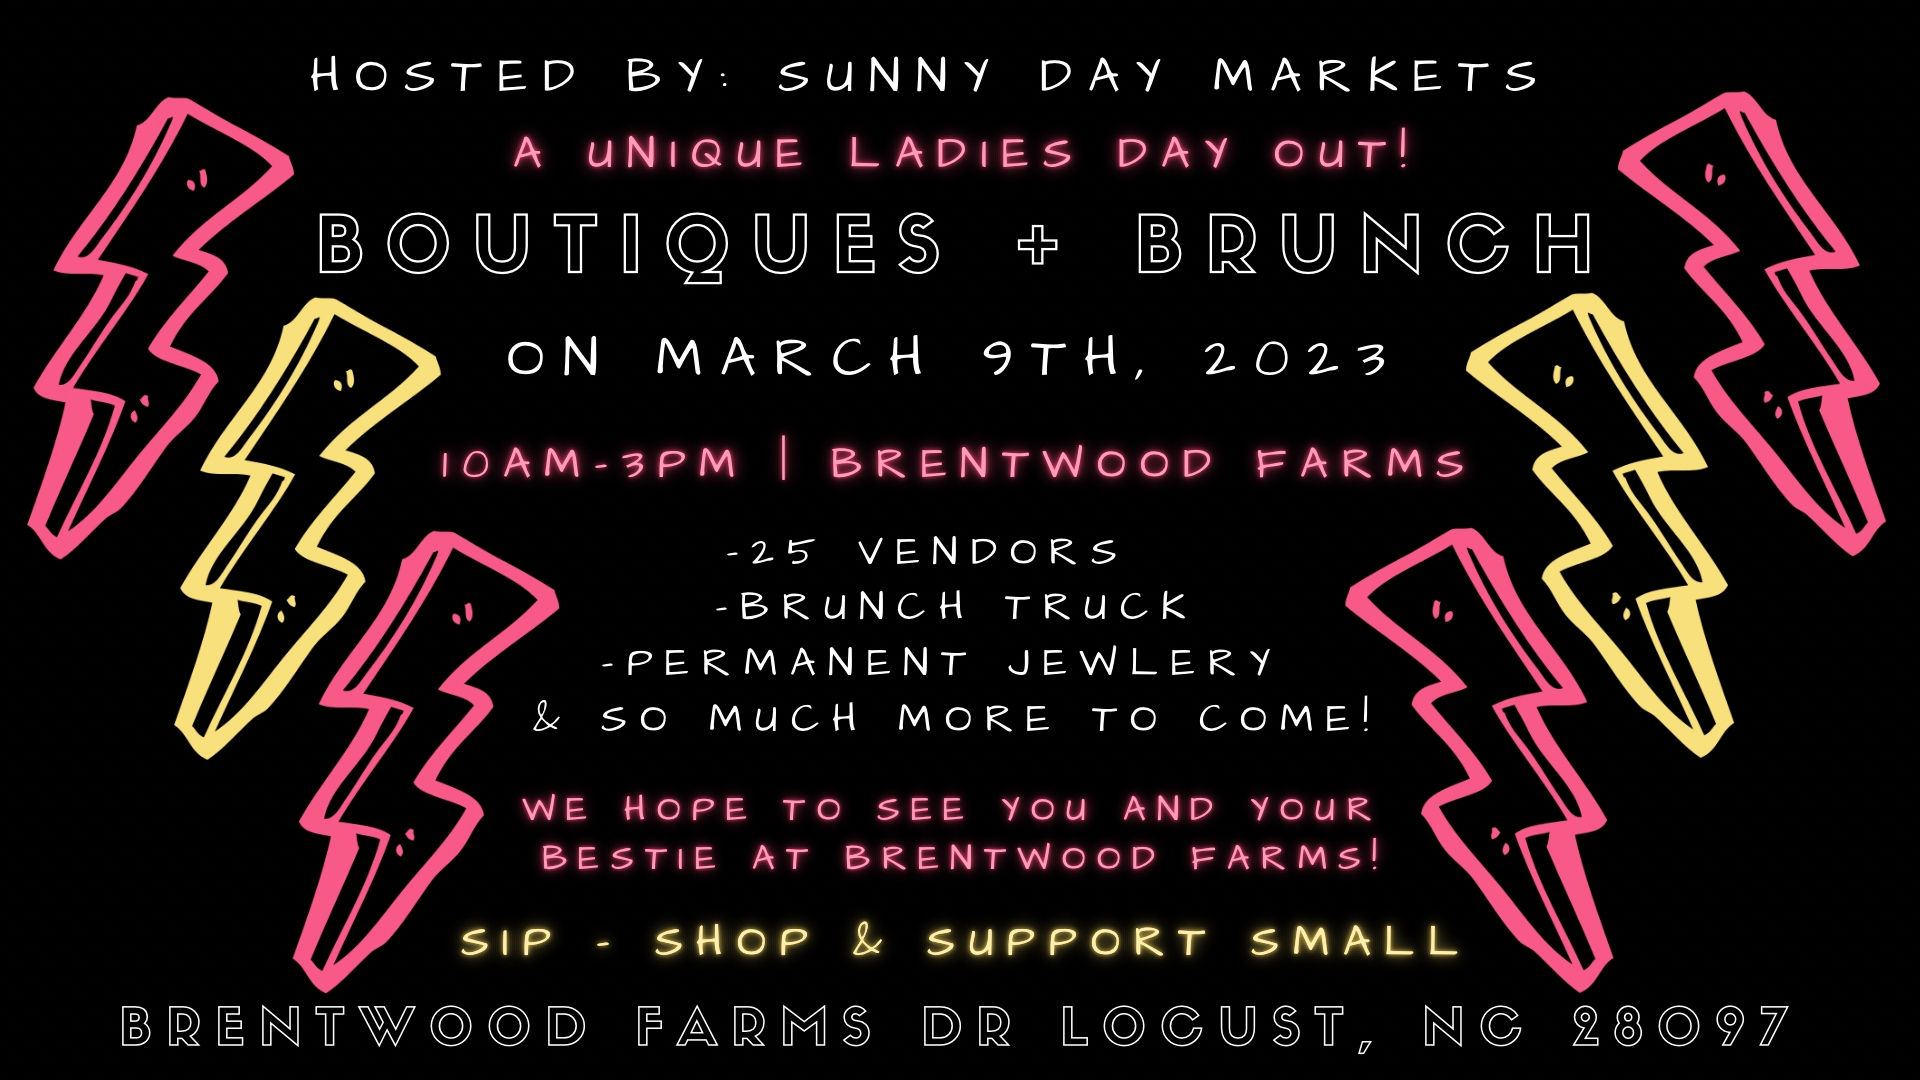 Brentwood Farms Boutique + Brunch cover image